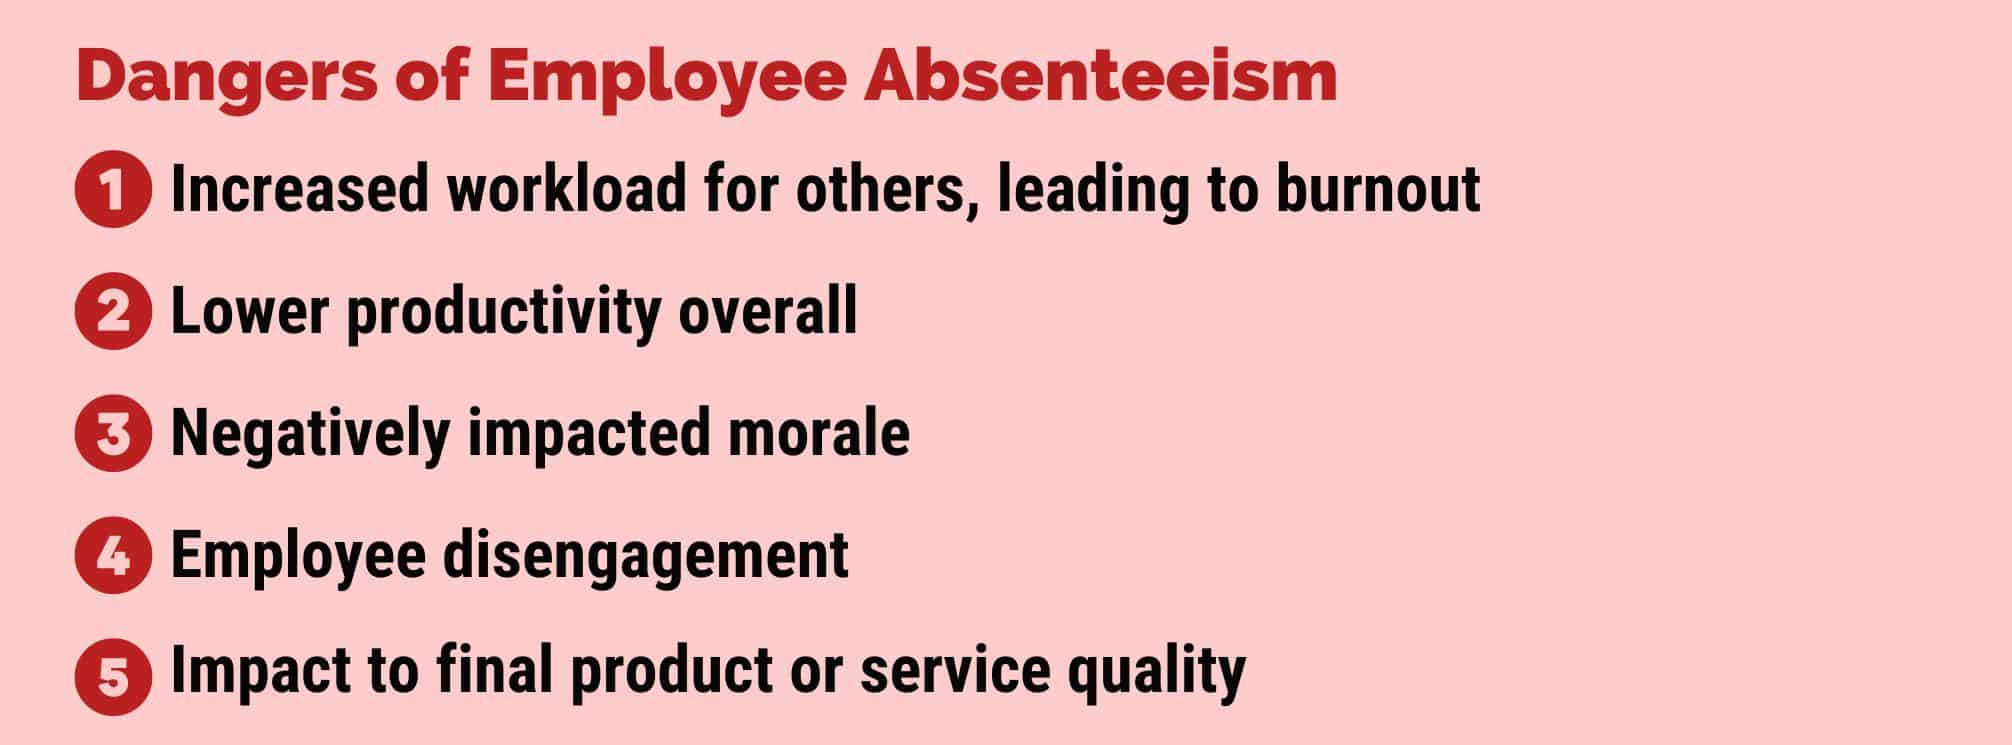 text graphic that says "dangers of employee absenteeism" with the list of negative impacts from the blog